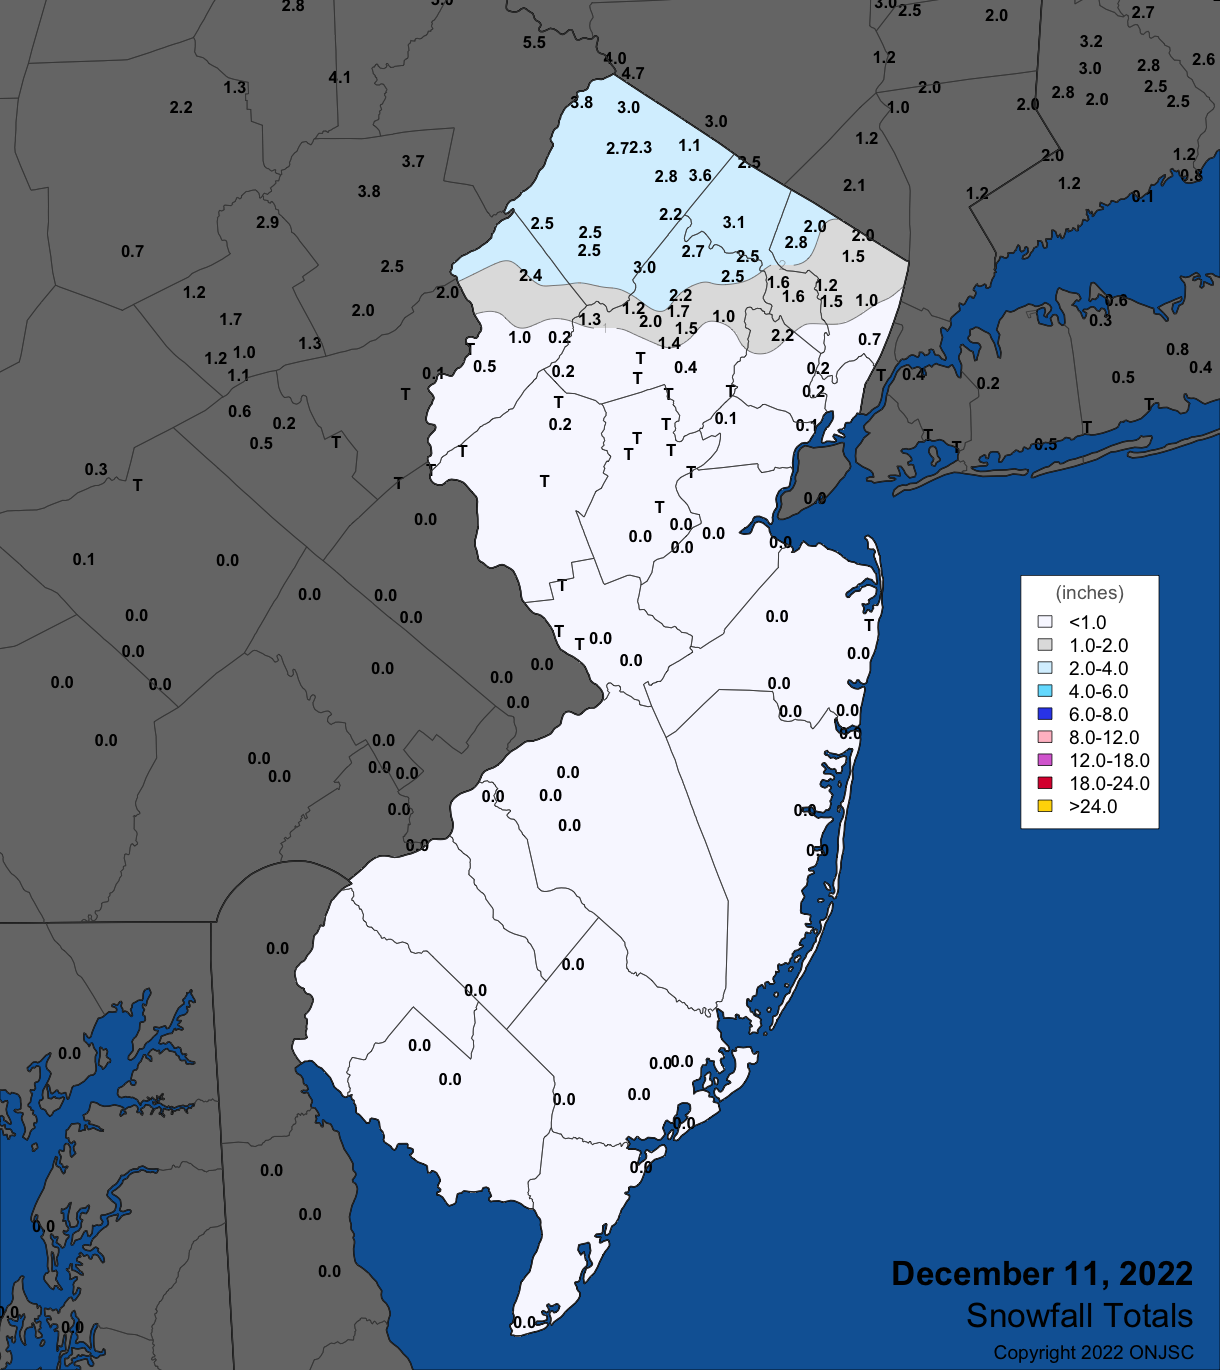 Snowfall on December 11th. Observations are from CoCoRaHS, NWS Cooperative Observer, and NWS trained spotter reports.